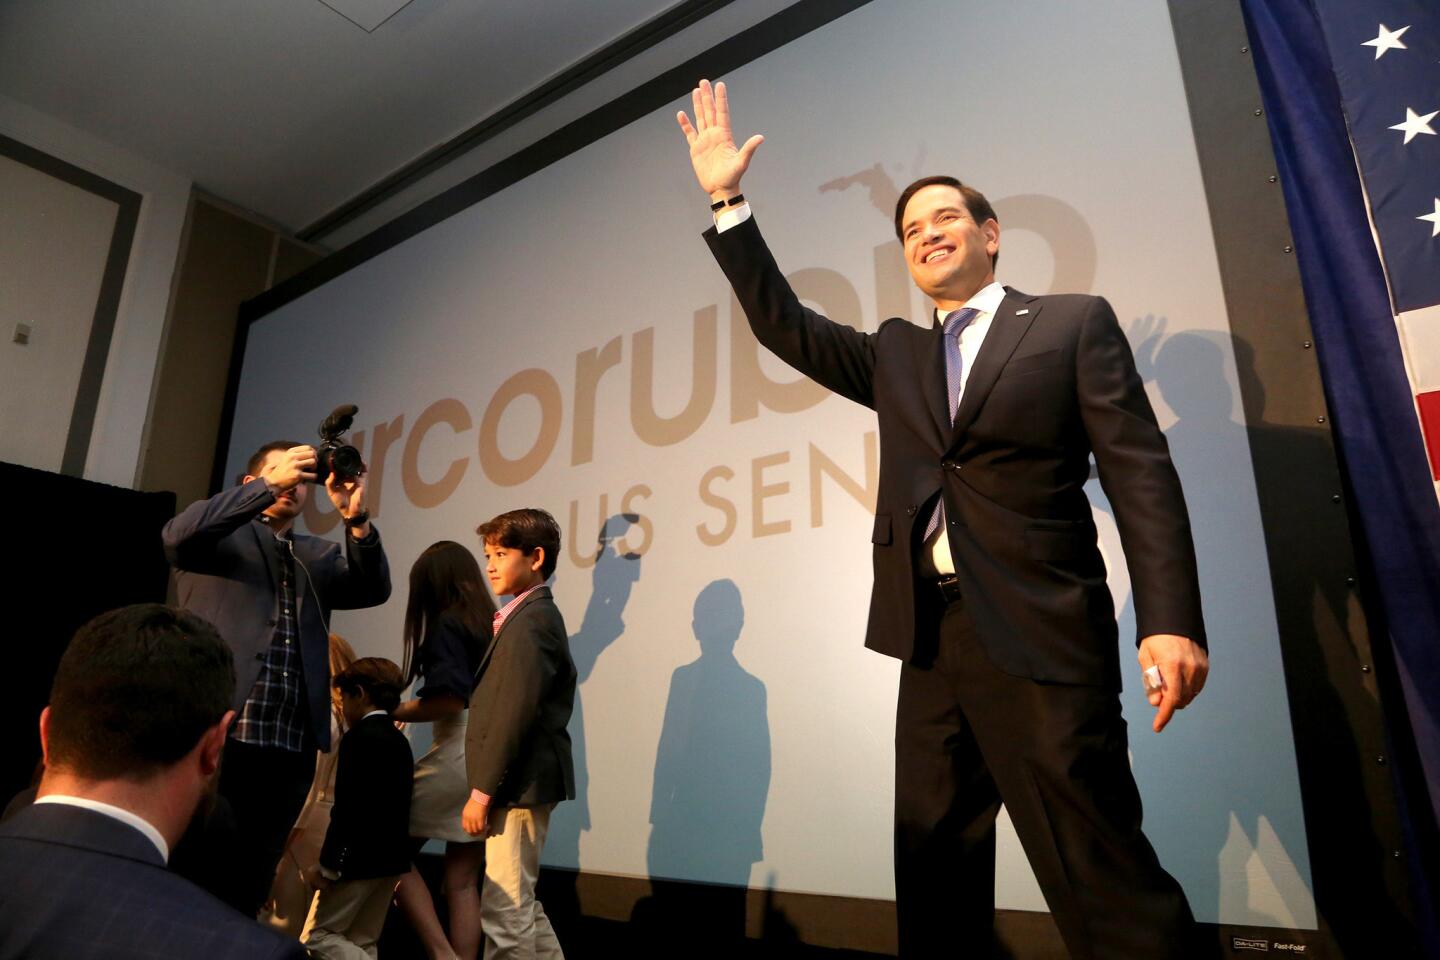 U.S. Sen. Marco Rubio greets his supporters at the Hilton Miami Airport Hotel Tuesady night after winning re-election over U.S. Rep. Patrick Murphy. Photo by Mike Stocker / South Florida Sun Sentinel